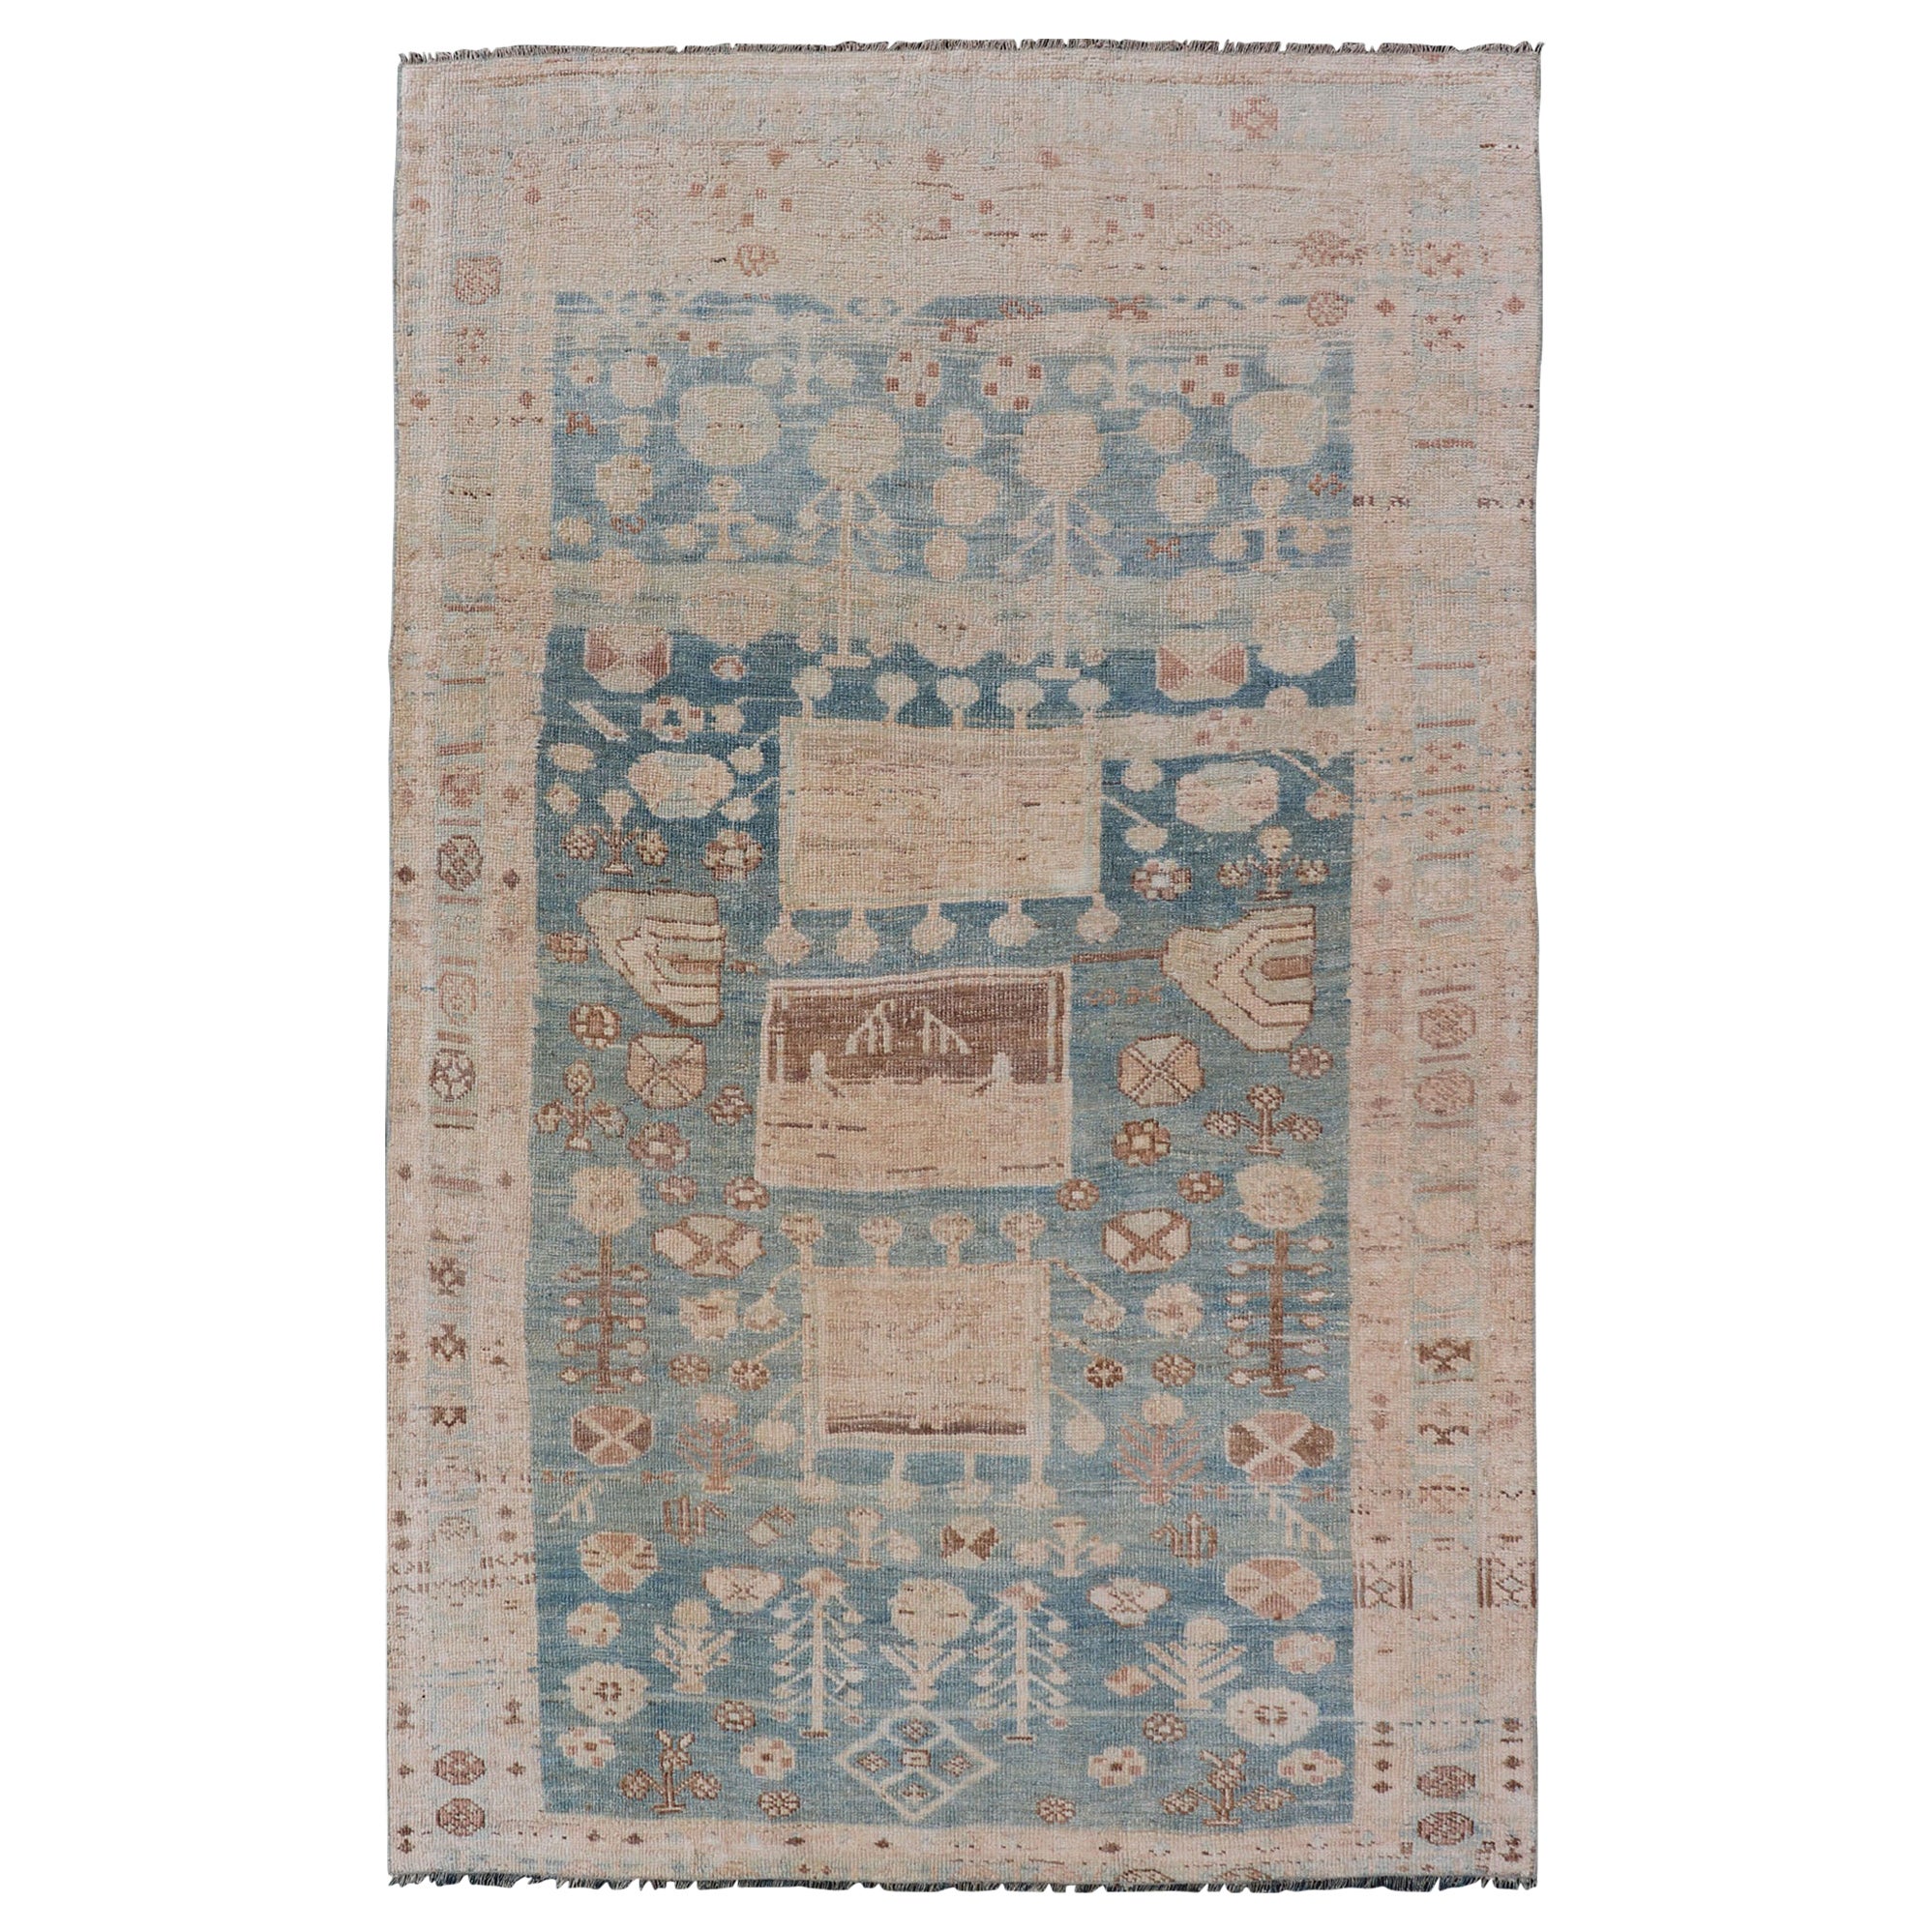 Persian Kurdish Antique Rug with Tribal Design in Light Blue, Teal, and Cream For Sale